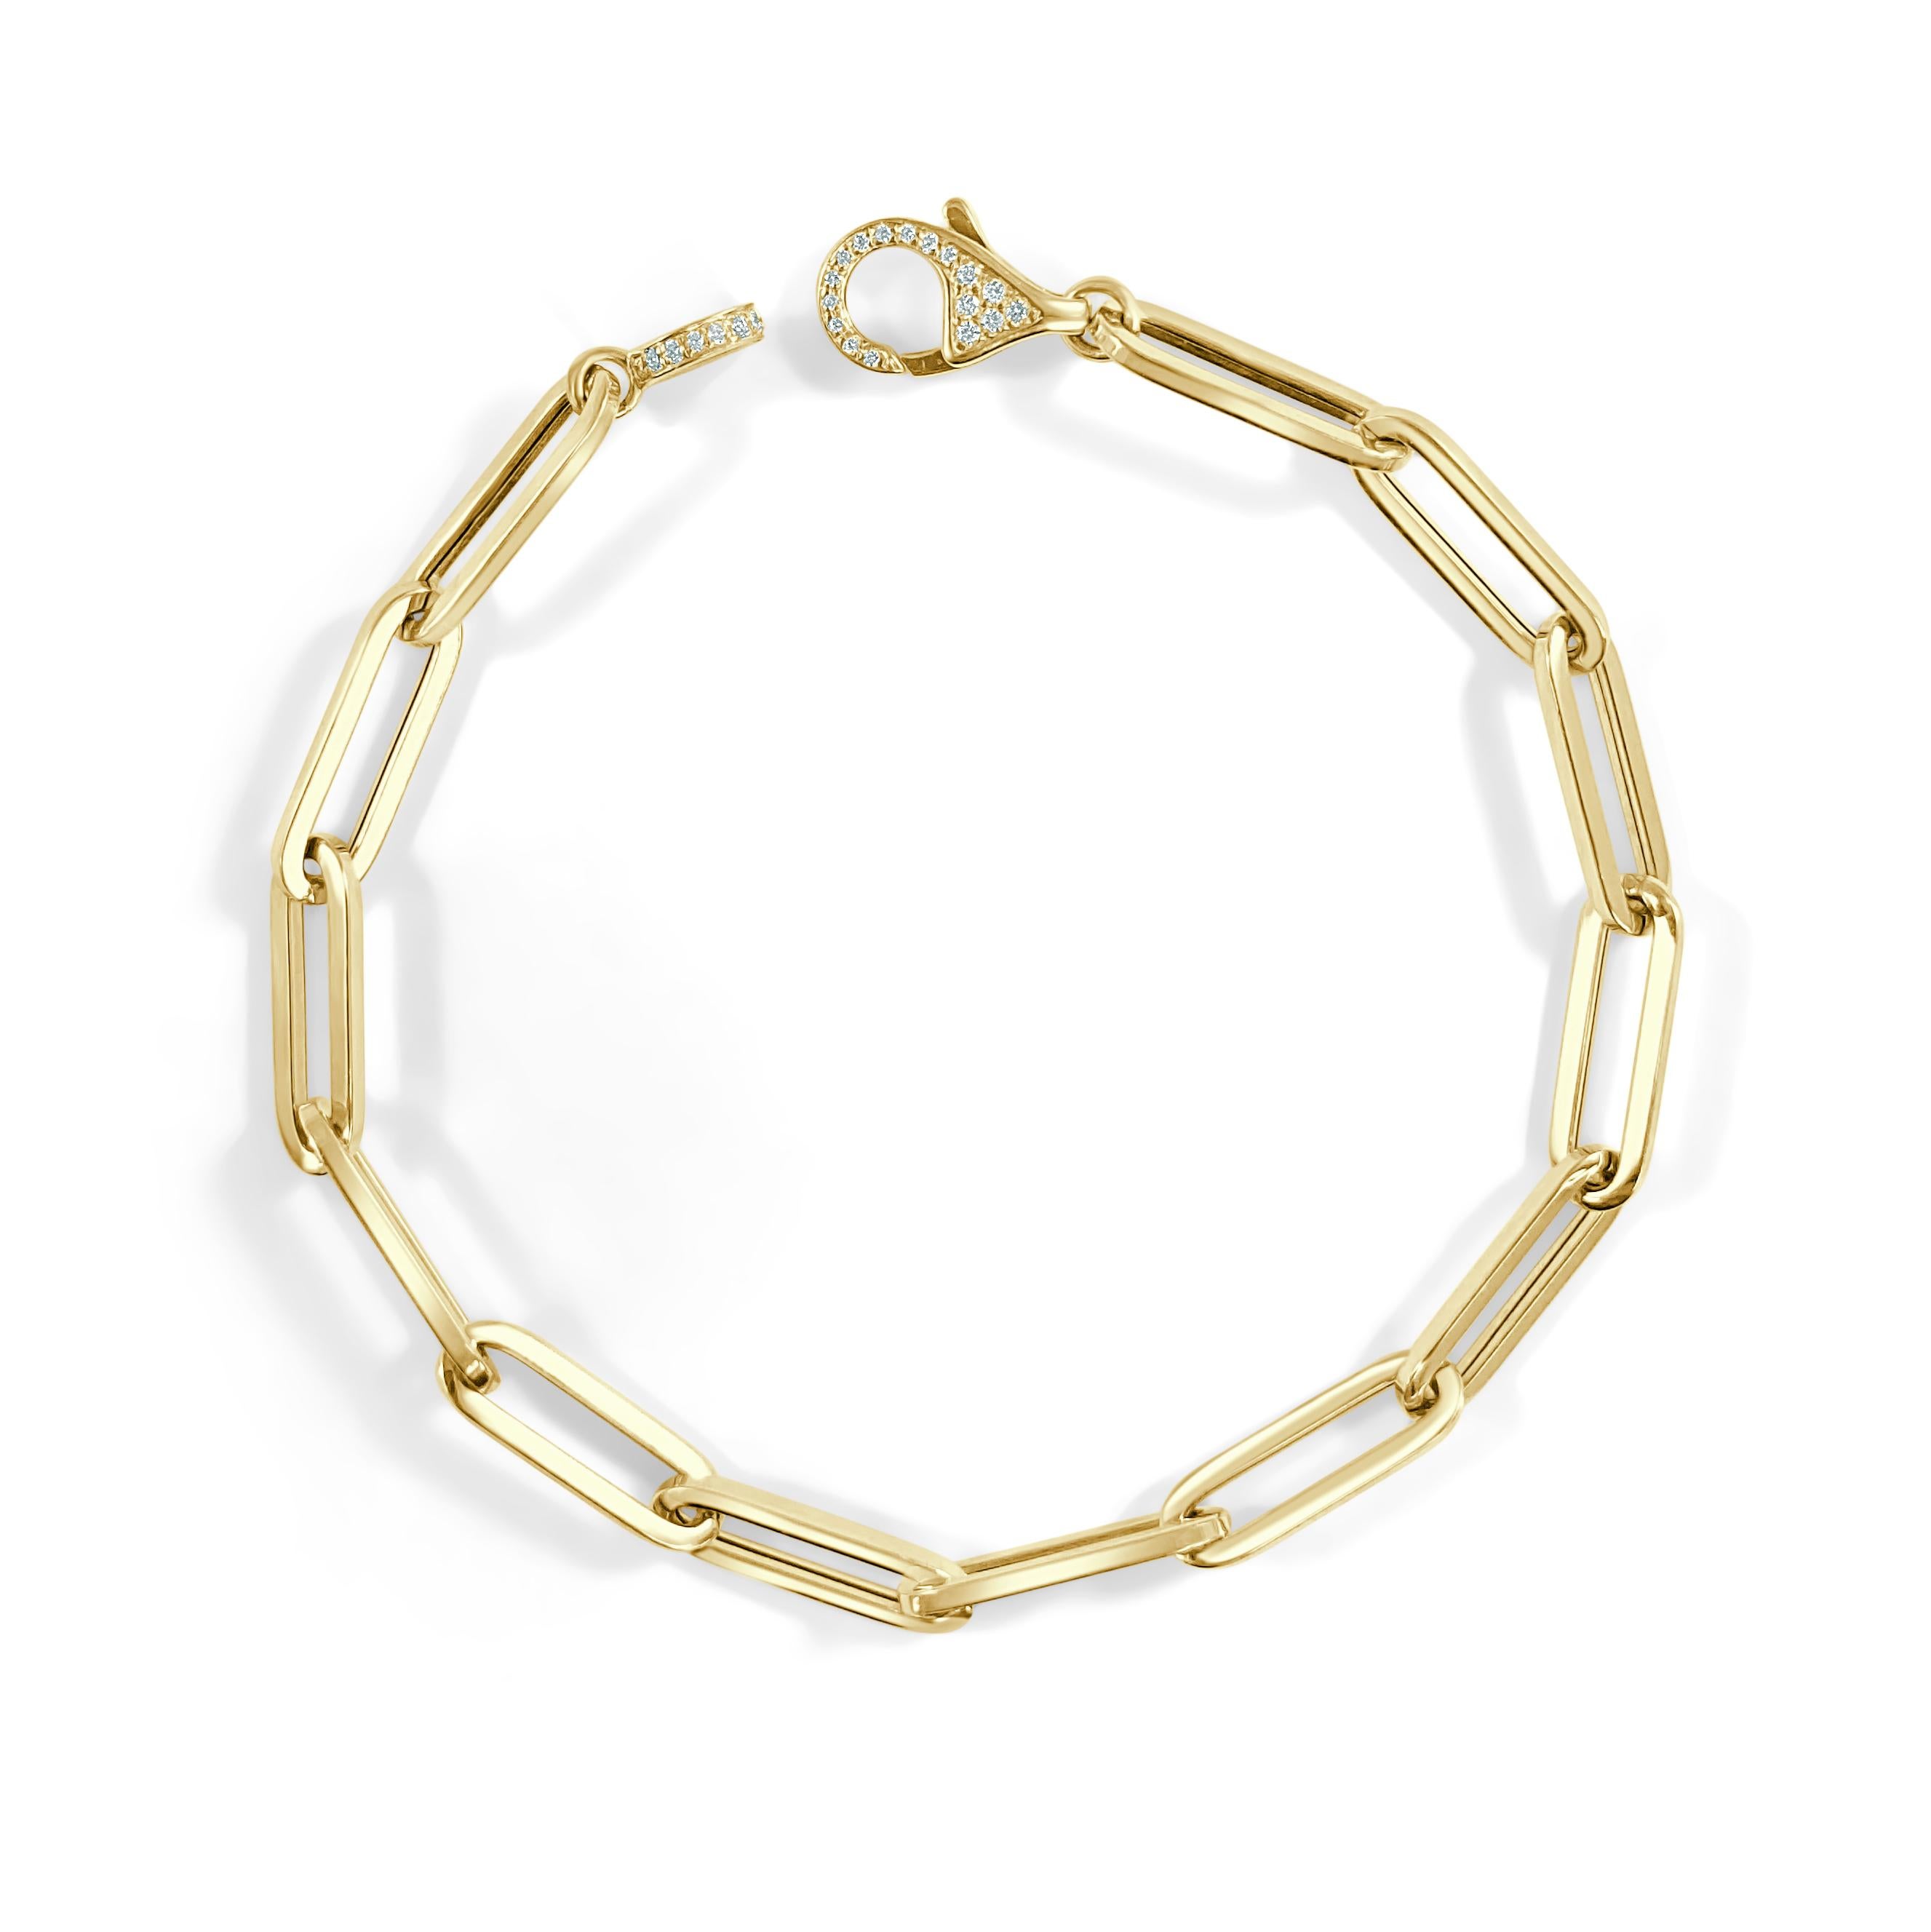 14K GOLD DIAMOND PAPERCLIP BRACELET

Diamond Weight: D0.21
This piece is perfect for everyday wear and makes the perfect Gift! 

We certify that this is an authentic piece of Fine jewelry. Every piece is crafted with the utmost care and precision.